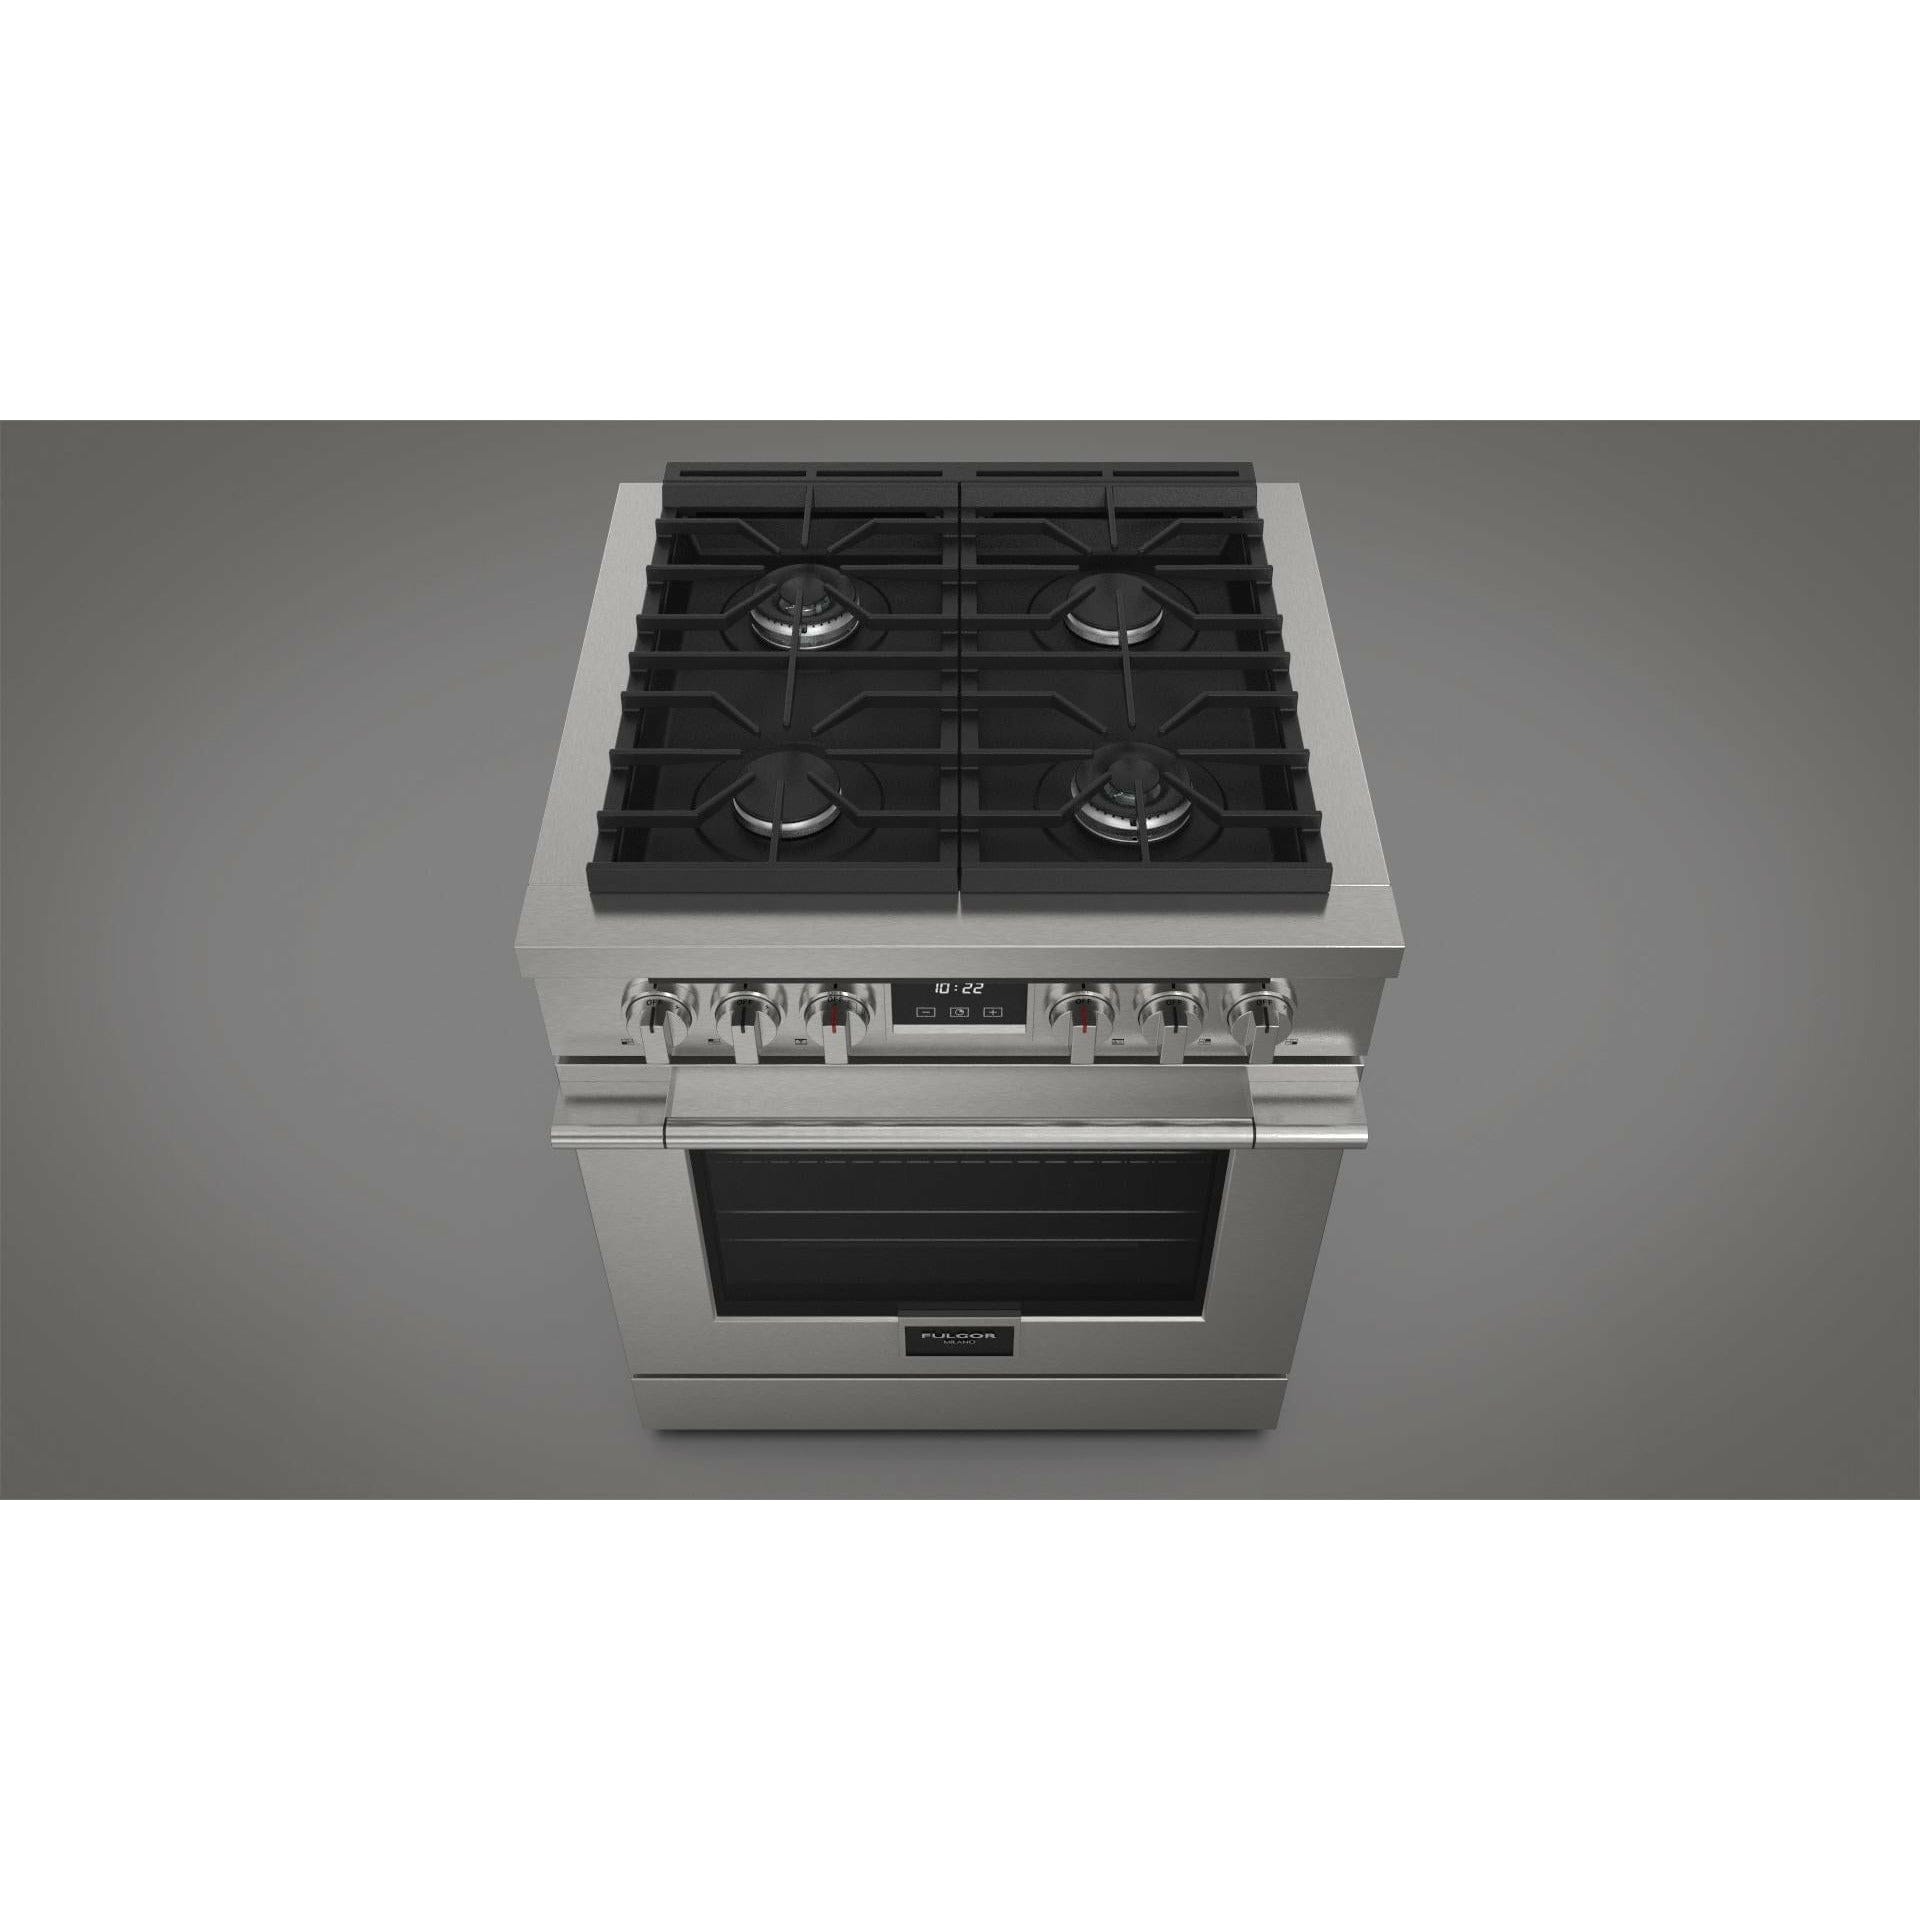 Fulgor Milano 30" Freestanding All Gas Range with 2 Duel Flame Burners, Stainless Steel - F4PGR304S2 Ranges Luxury Appliances Direct